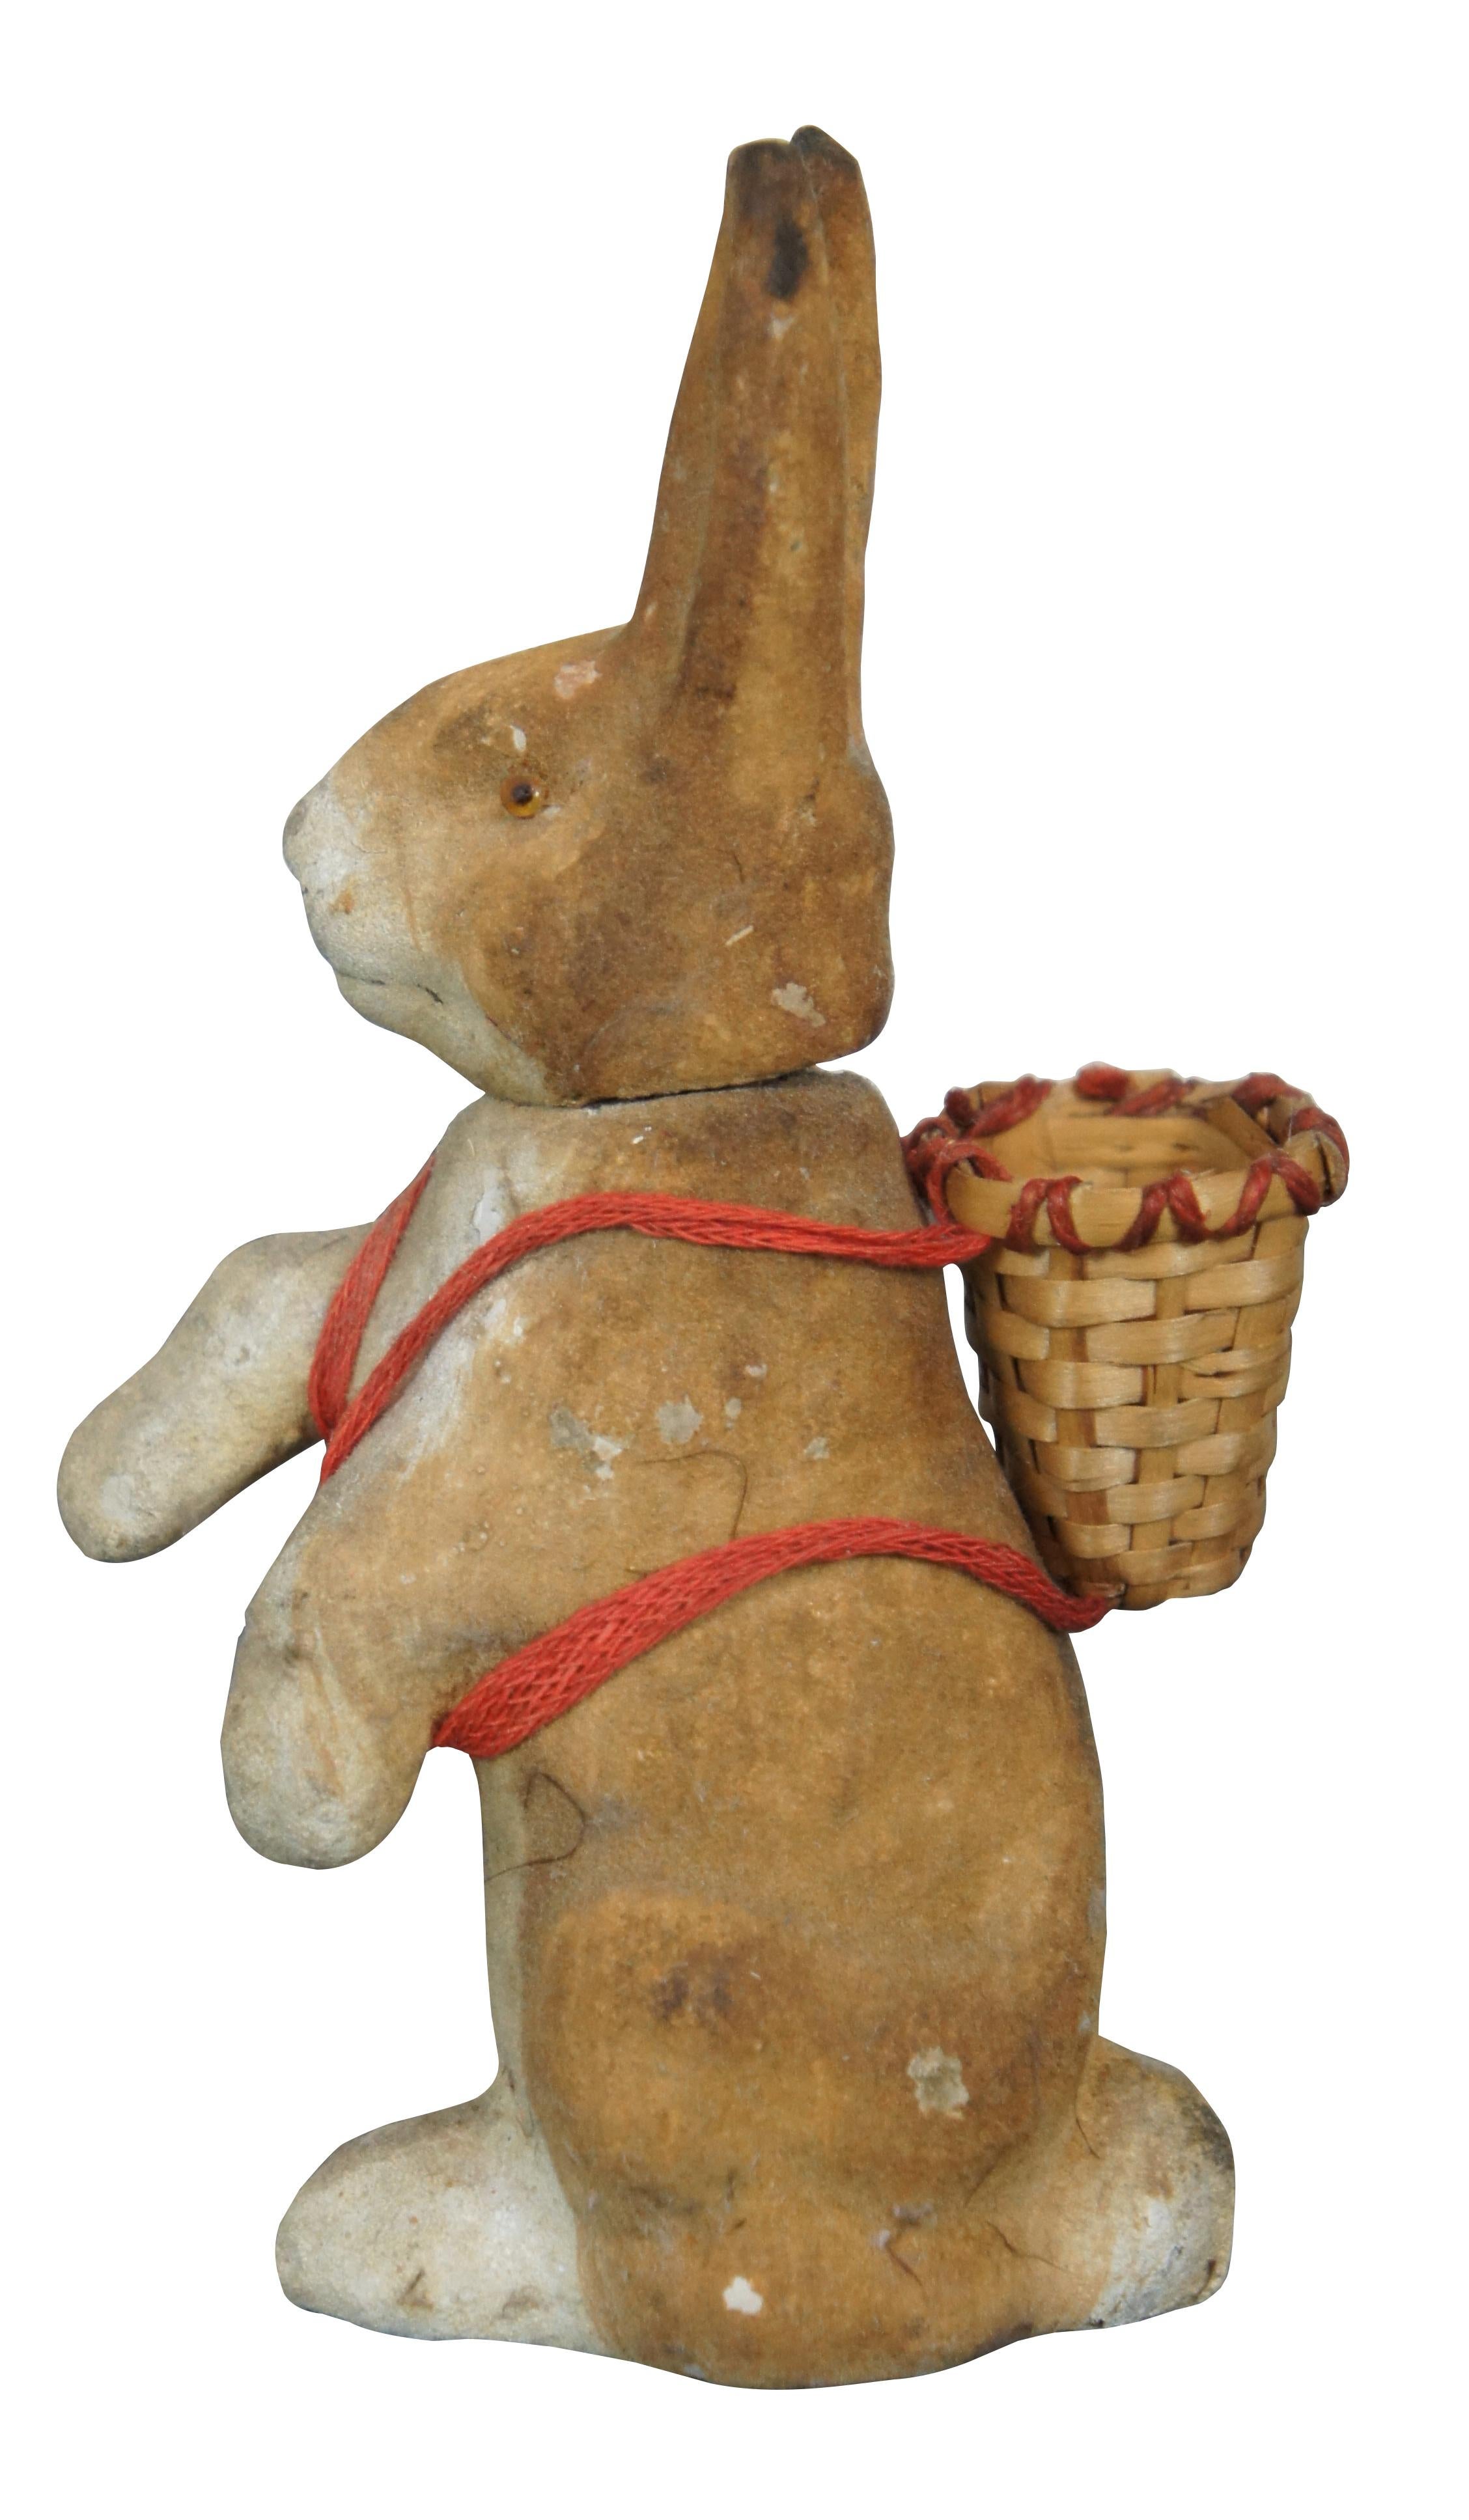 Early 20th century German paper mache Easter candy container in the shape of a brown rabbit seated upright, with brown glass eyes and wearing a basket on its back. Head acts as stopper.